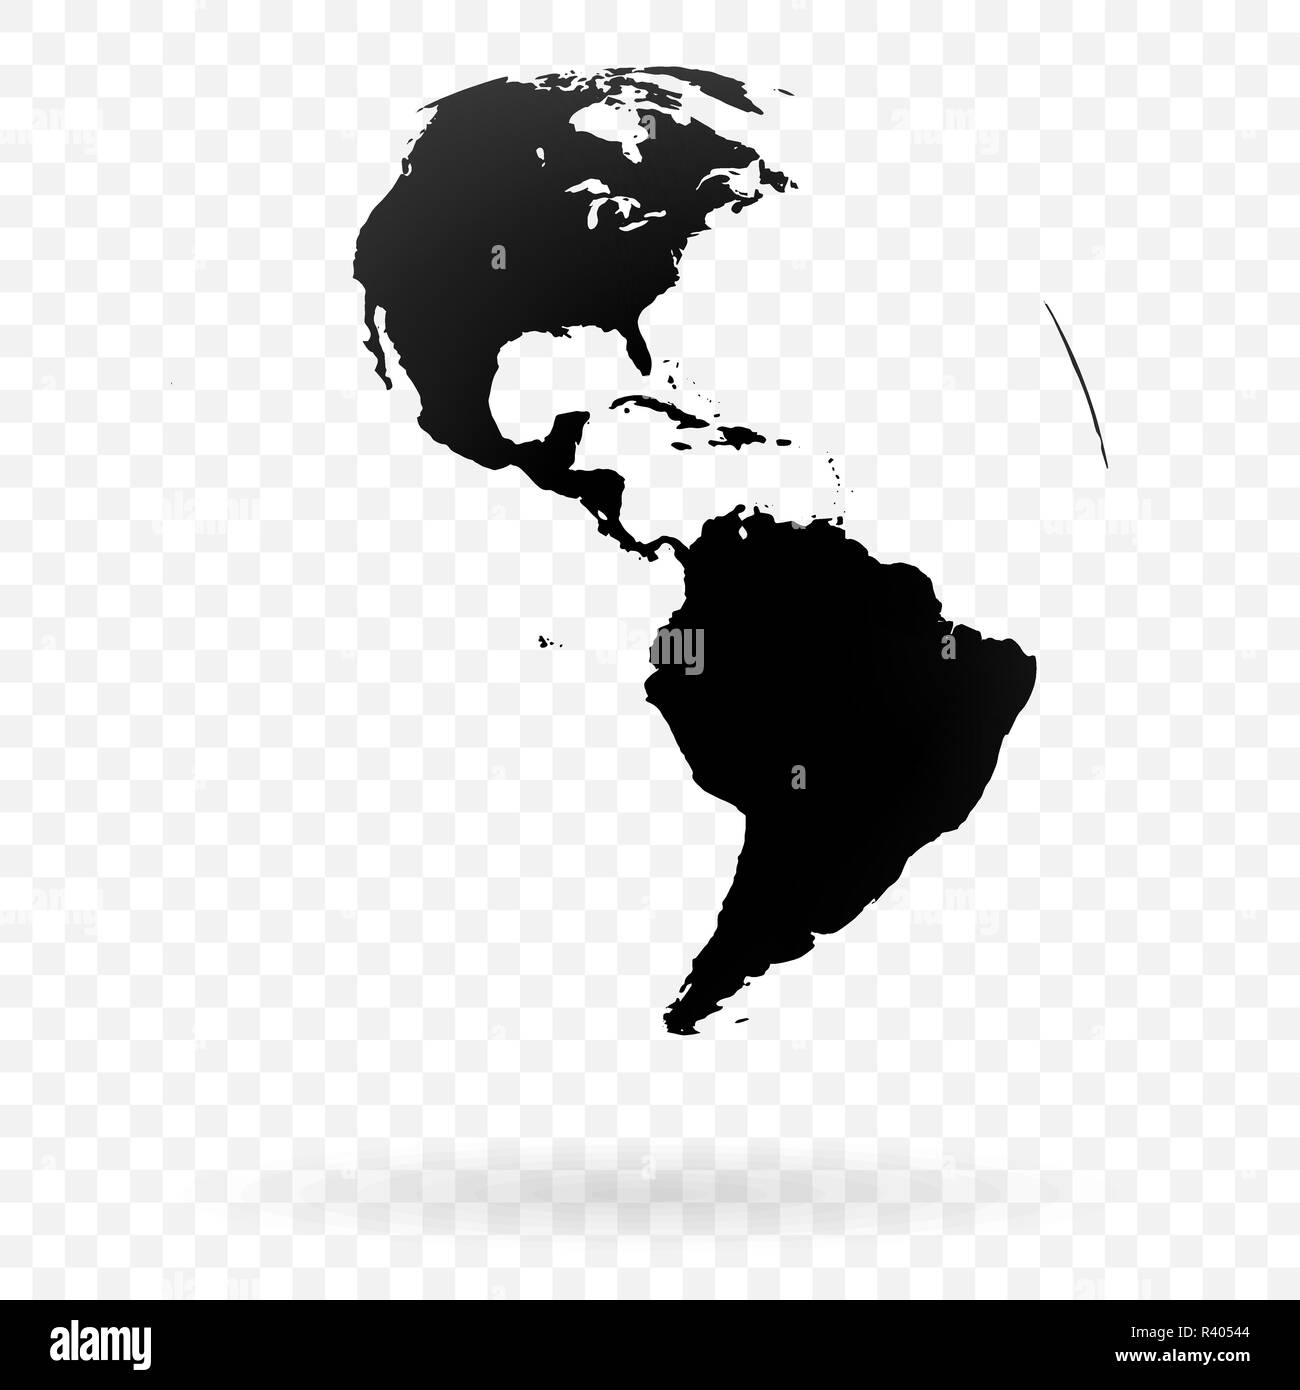 Highly detailed Earth globe symbol, North and South America. Black on white background. Stock Vector